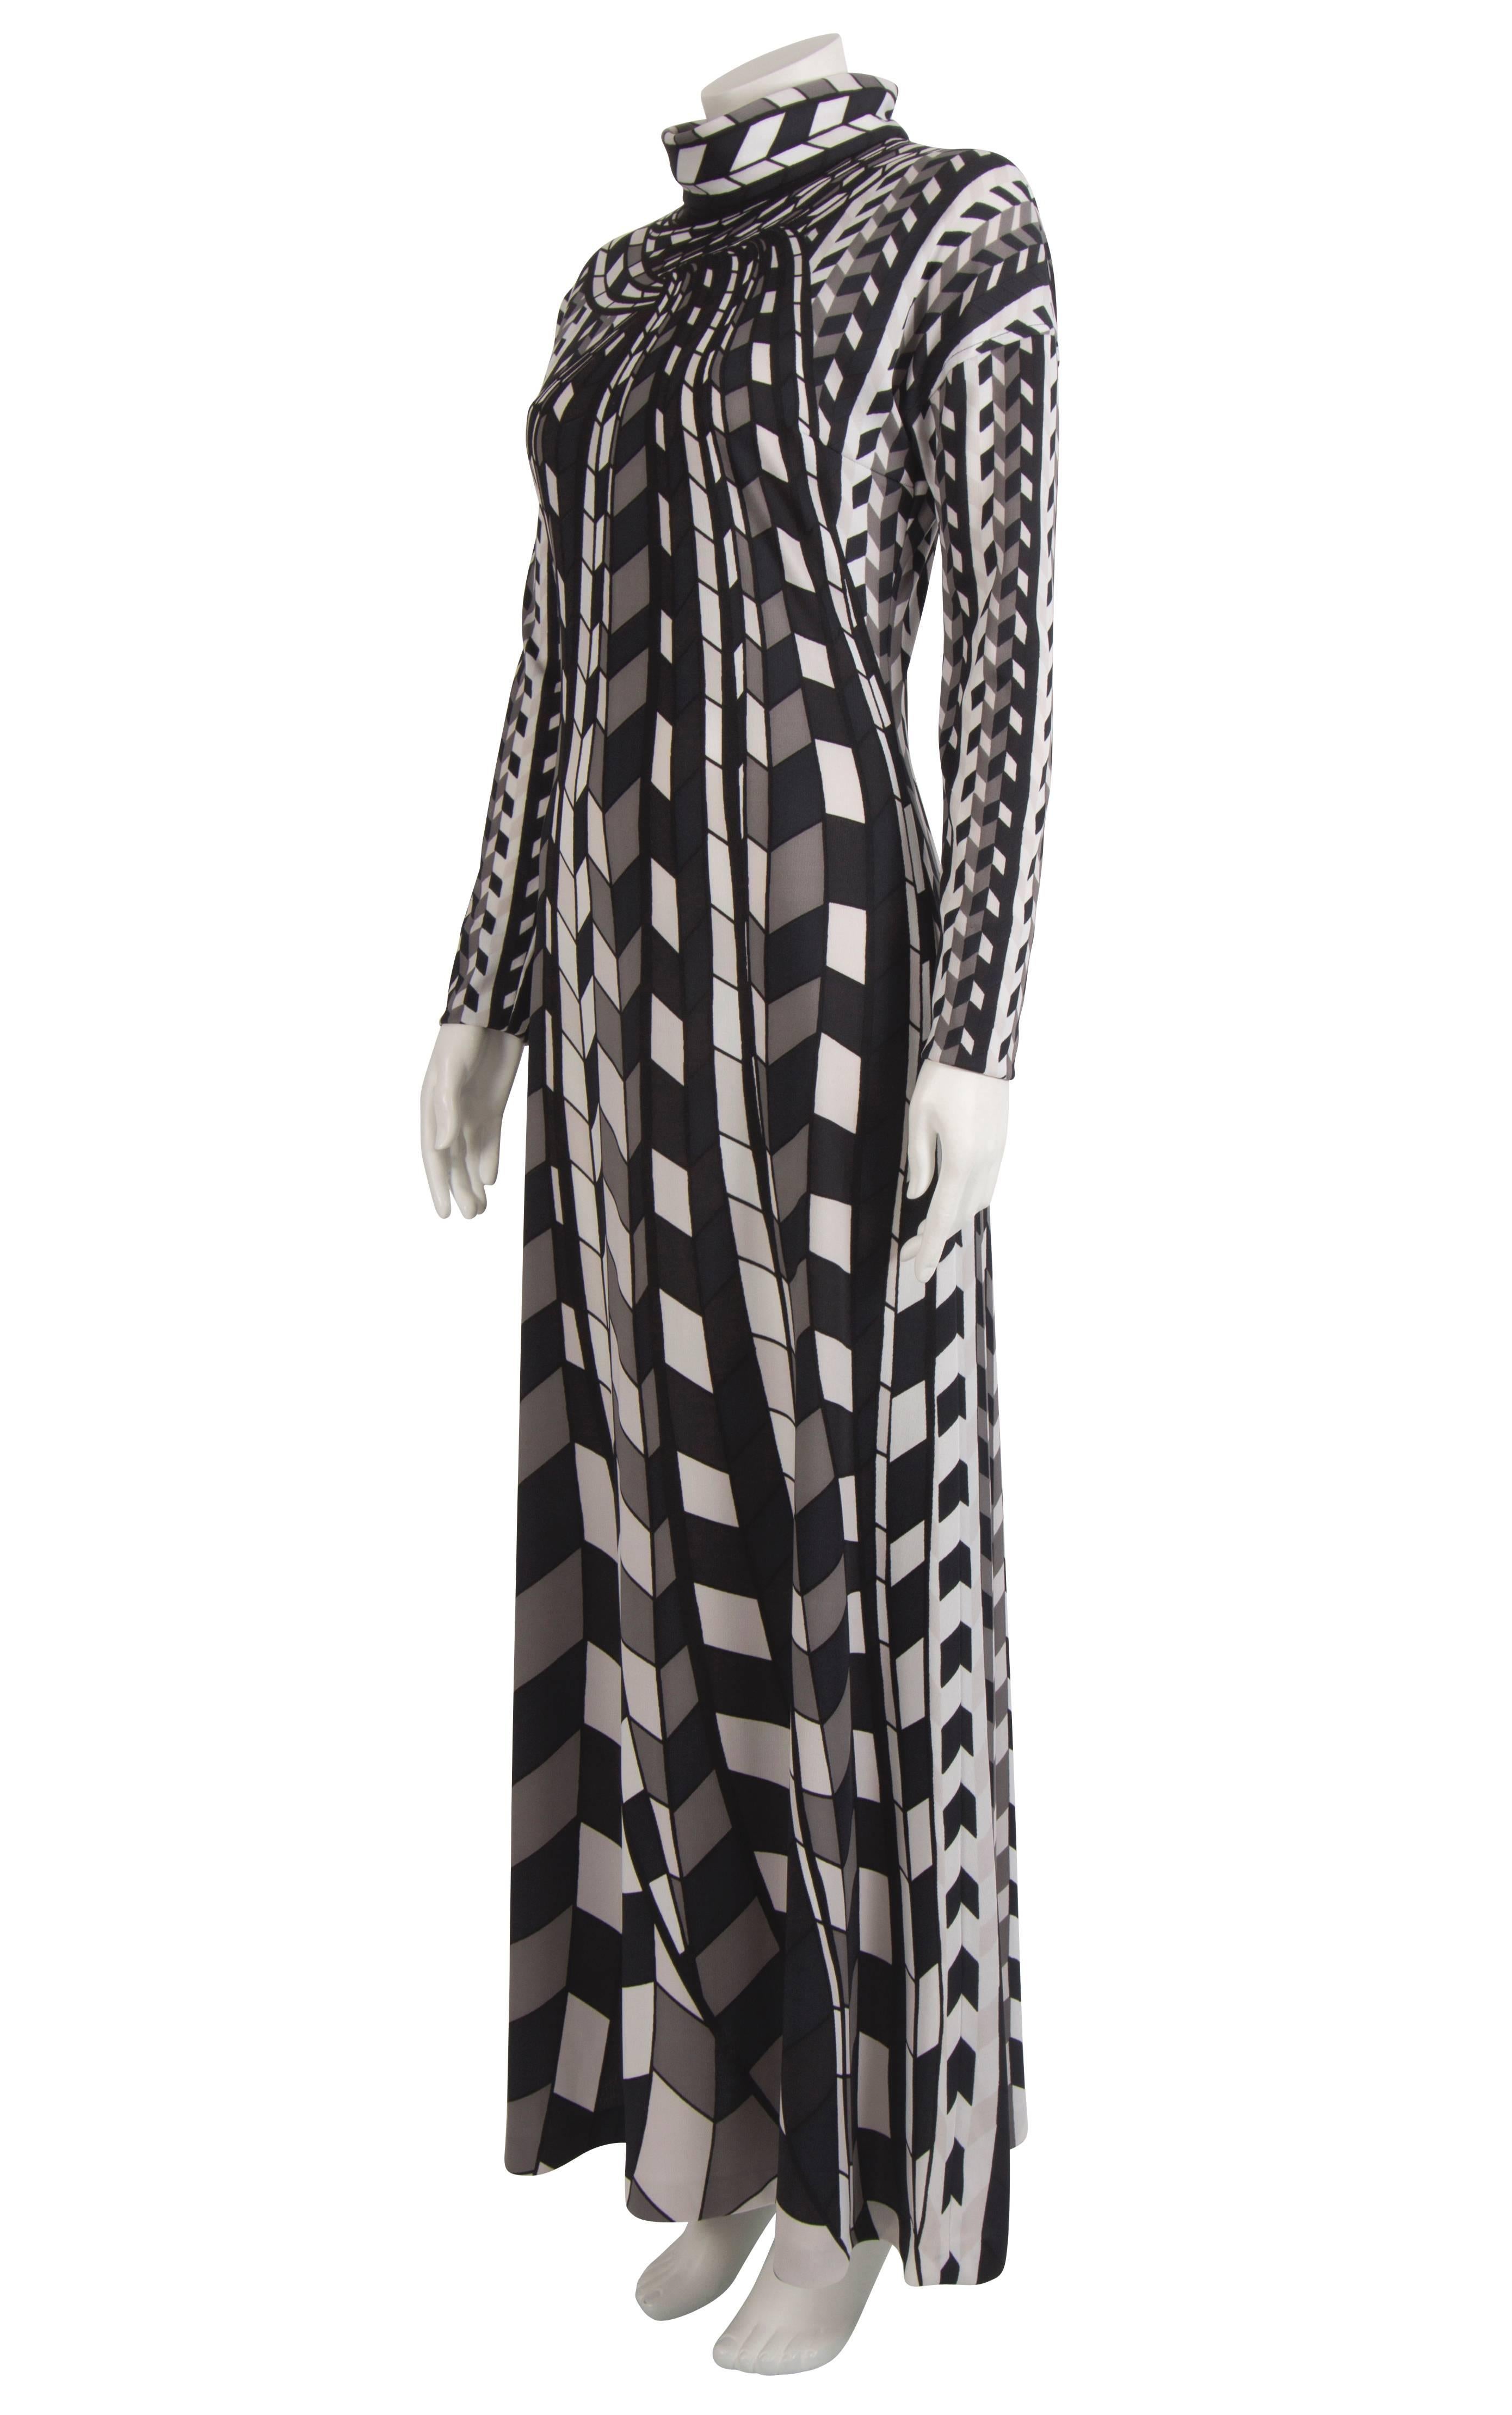 A 1970's Roberta di Camerino trompe l'oeil cubist monochrome column dress. Made from a soft polyester knit, the dress features long sleeves and a polo neck. The pattern on this dress features cubes in different dimensions which seem to move upwards